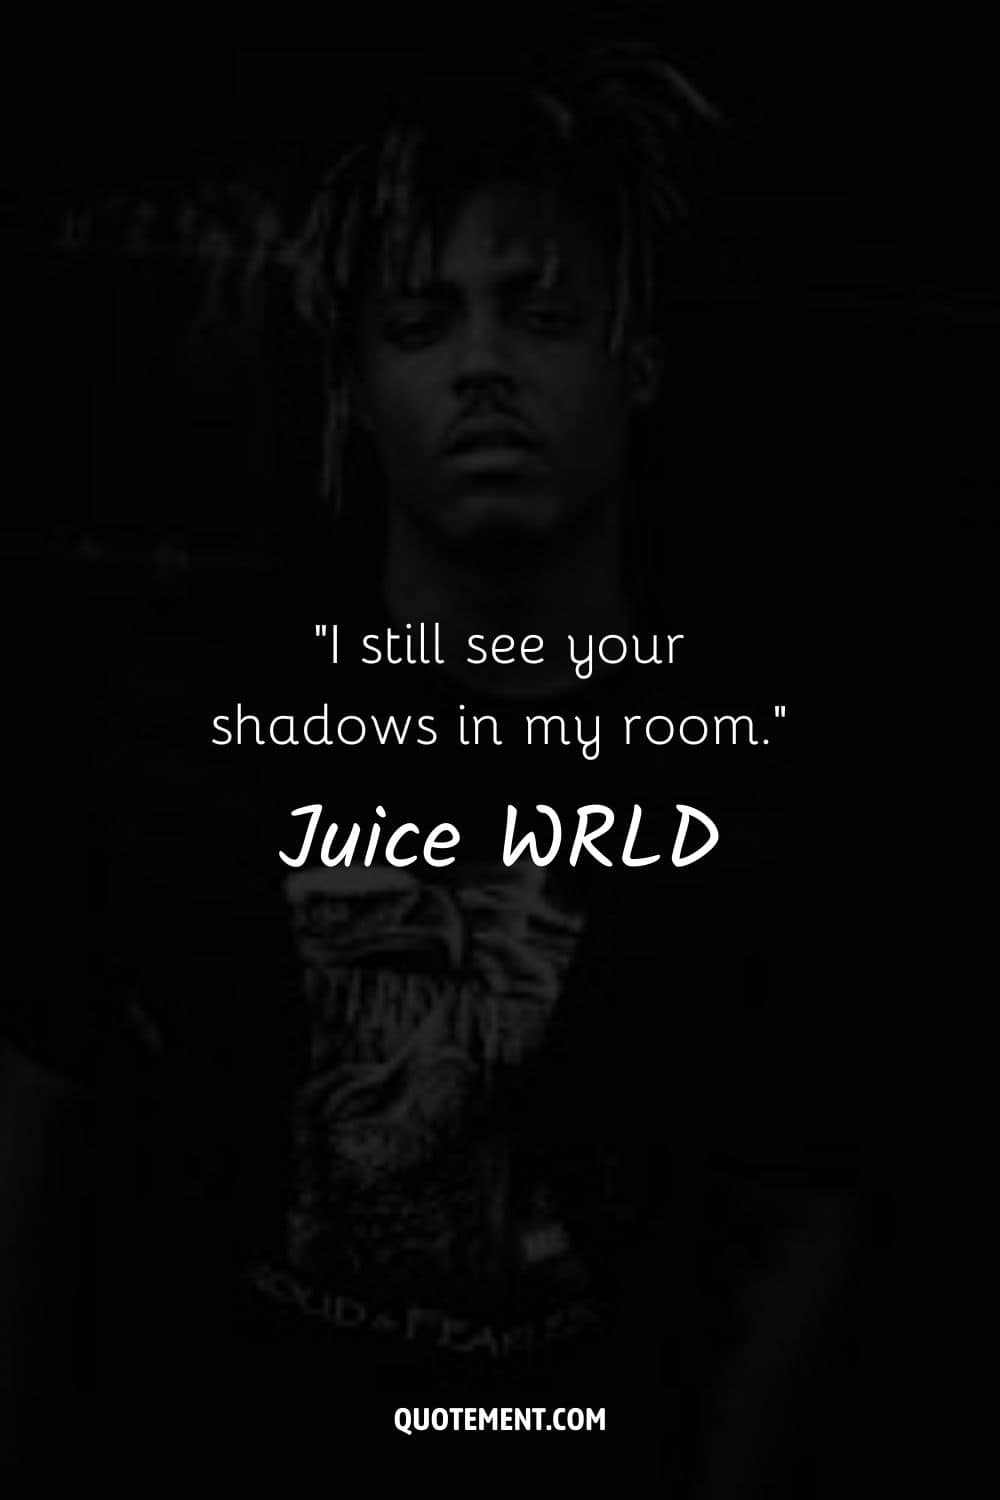 I still see your shadows in my room.